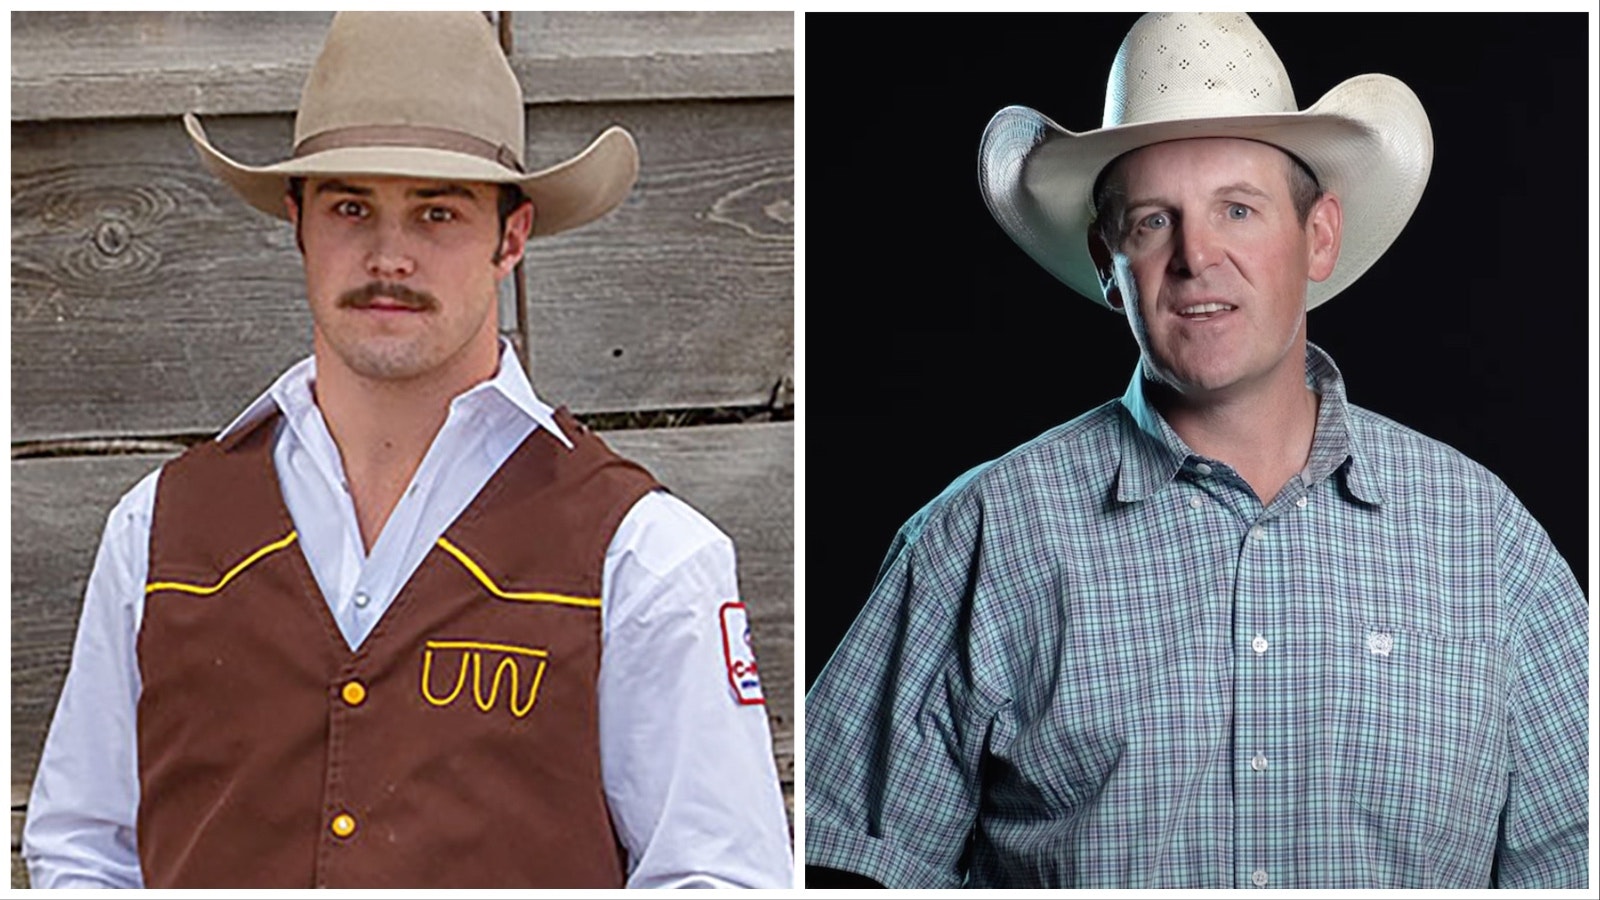 Donny Proffit, left, of the University of Wyoming men's rodeo team has made more than $18,000 this season in PRCA events. The UW men will go into next month's CFNR in Casper without their head coach, Beau Clark, right, who abruptly resigned this week.